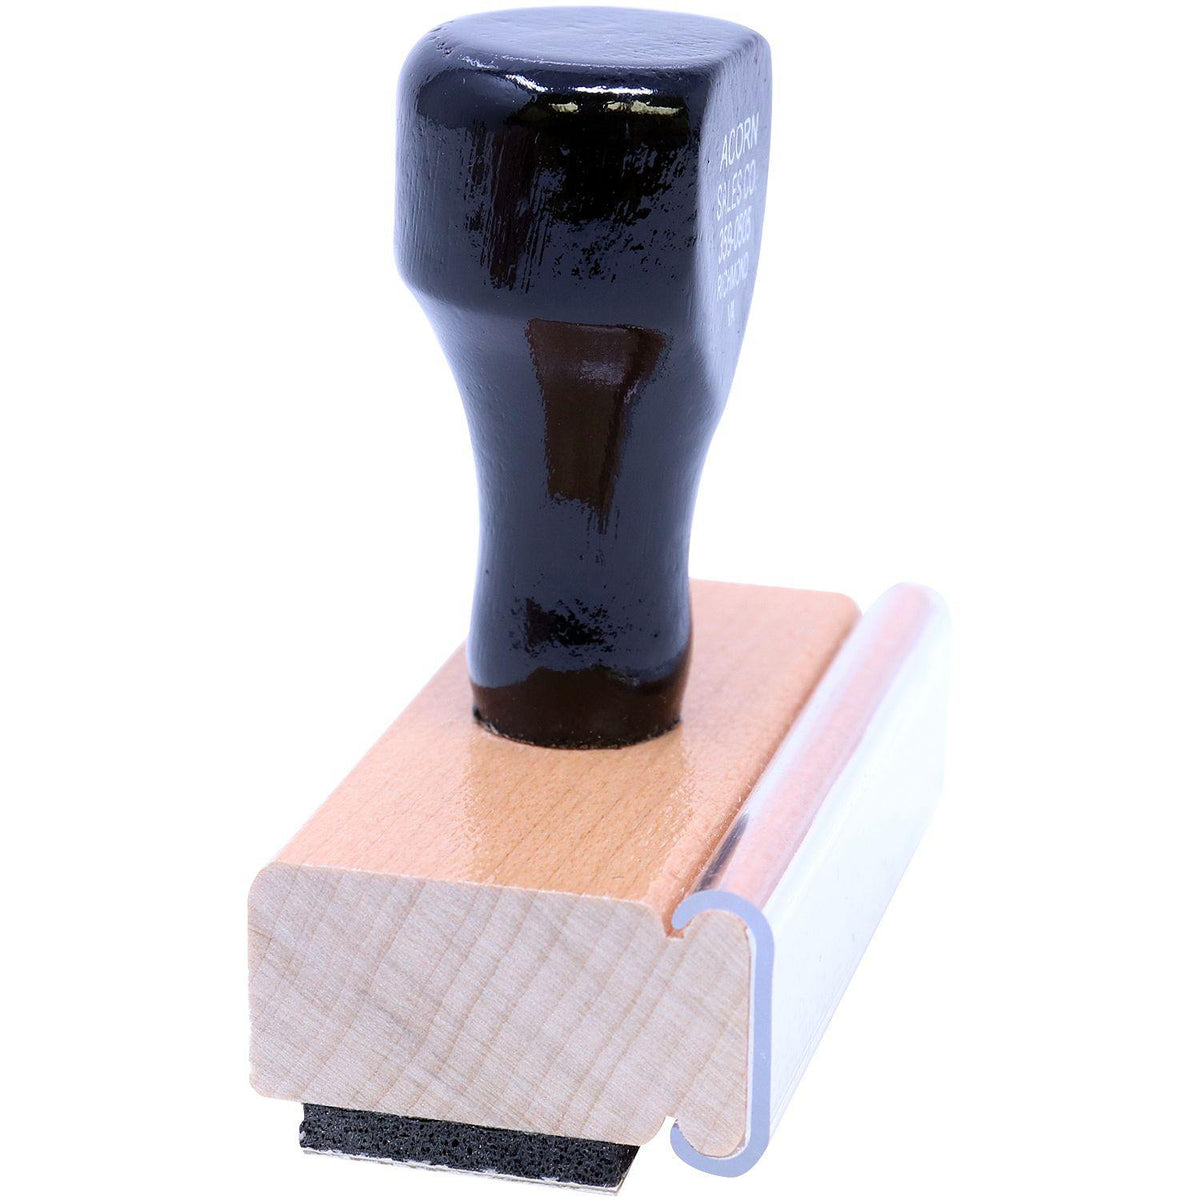 Side View of Void with Strikelines Rubber Stamp at an Angle